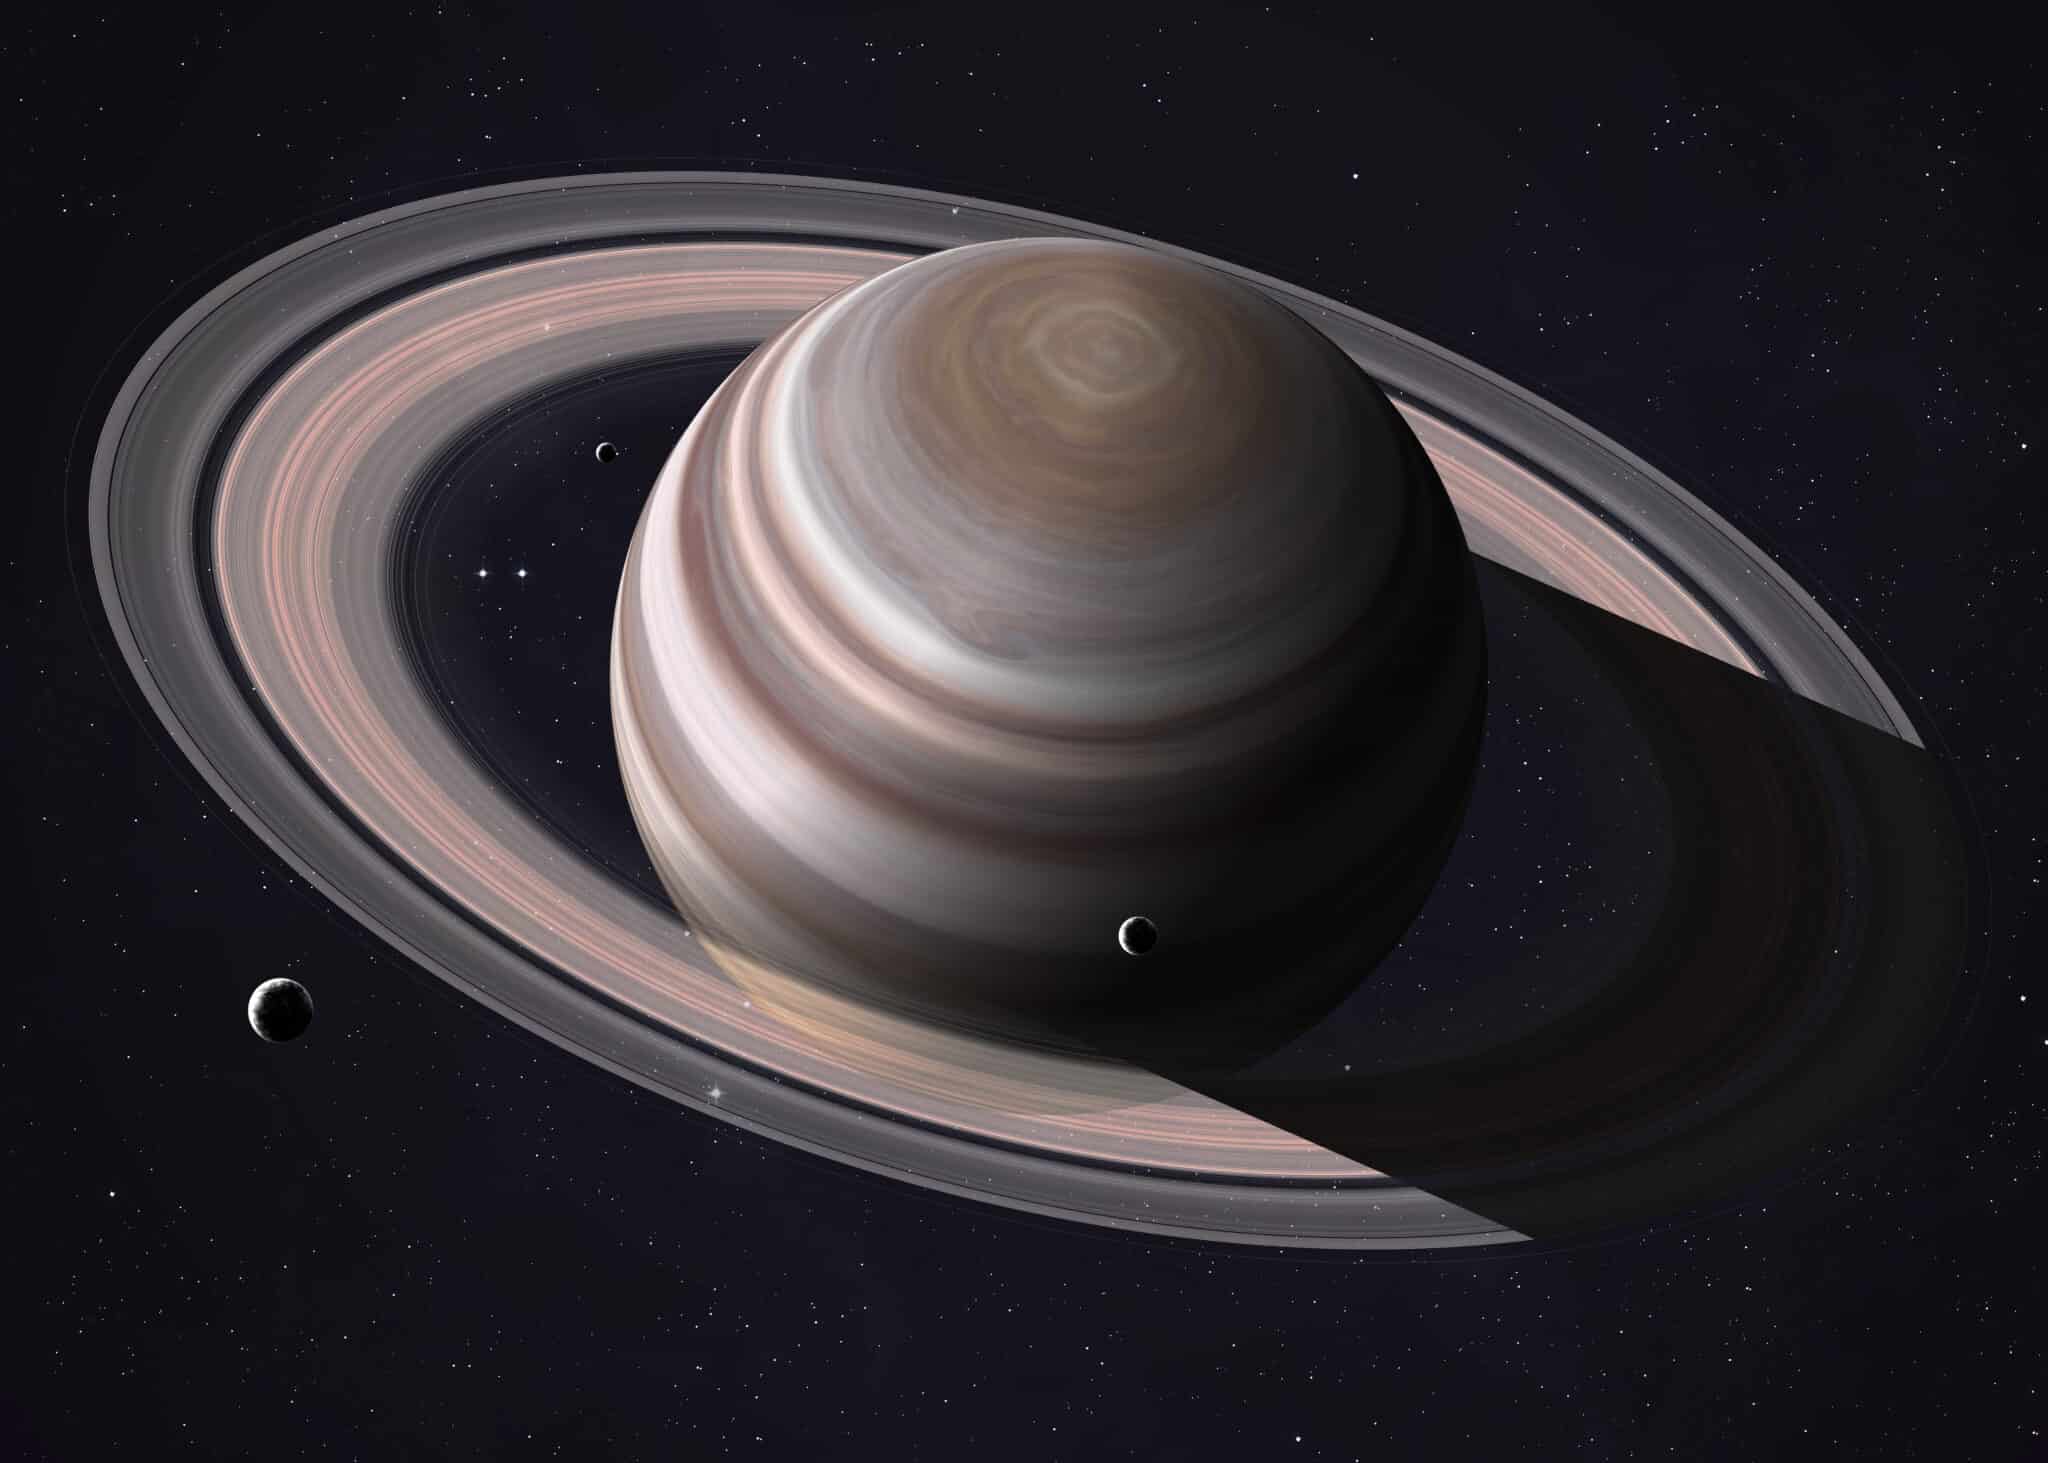 How Many Moons Does Saturn Have?